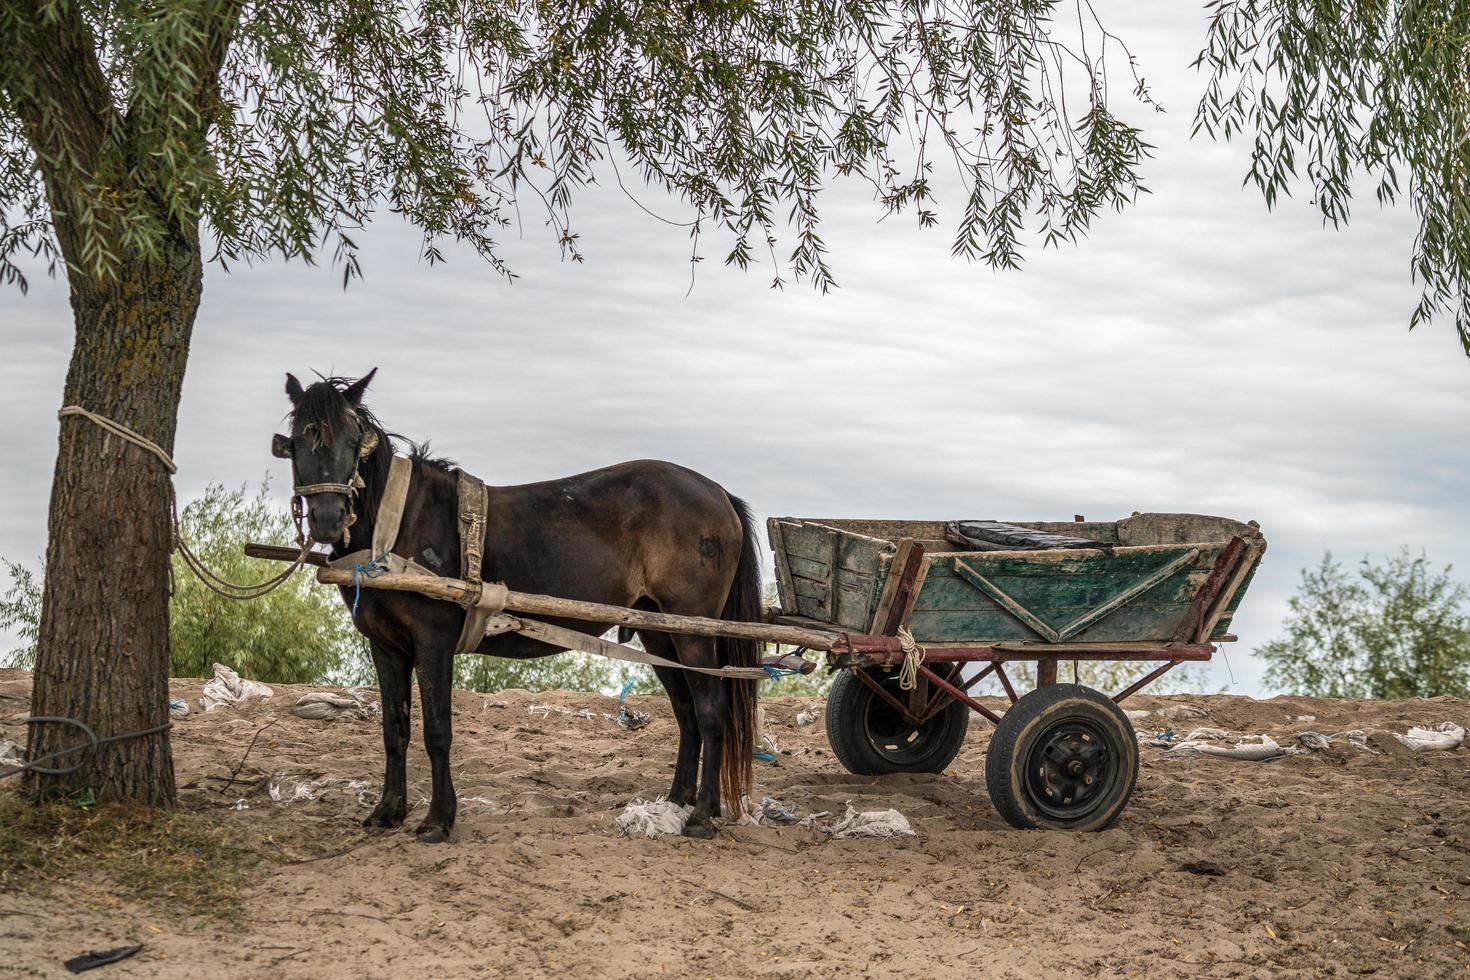 Horse and cart in Sulina Danube Delta Romania on September 23, 2018 photo